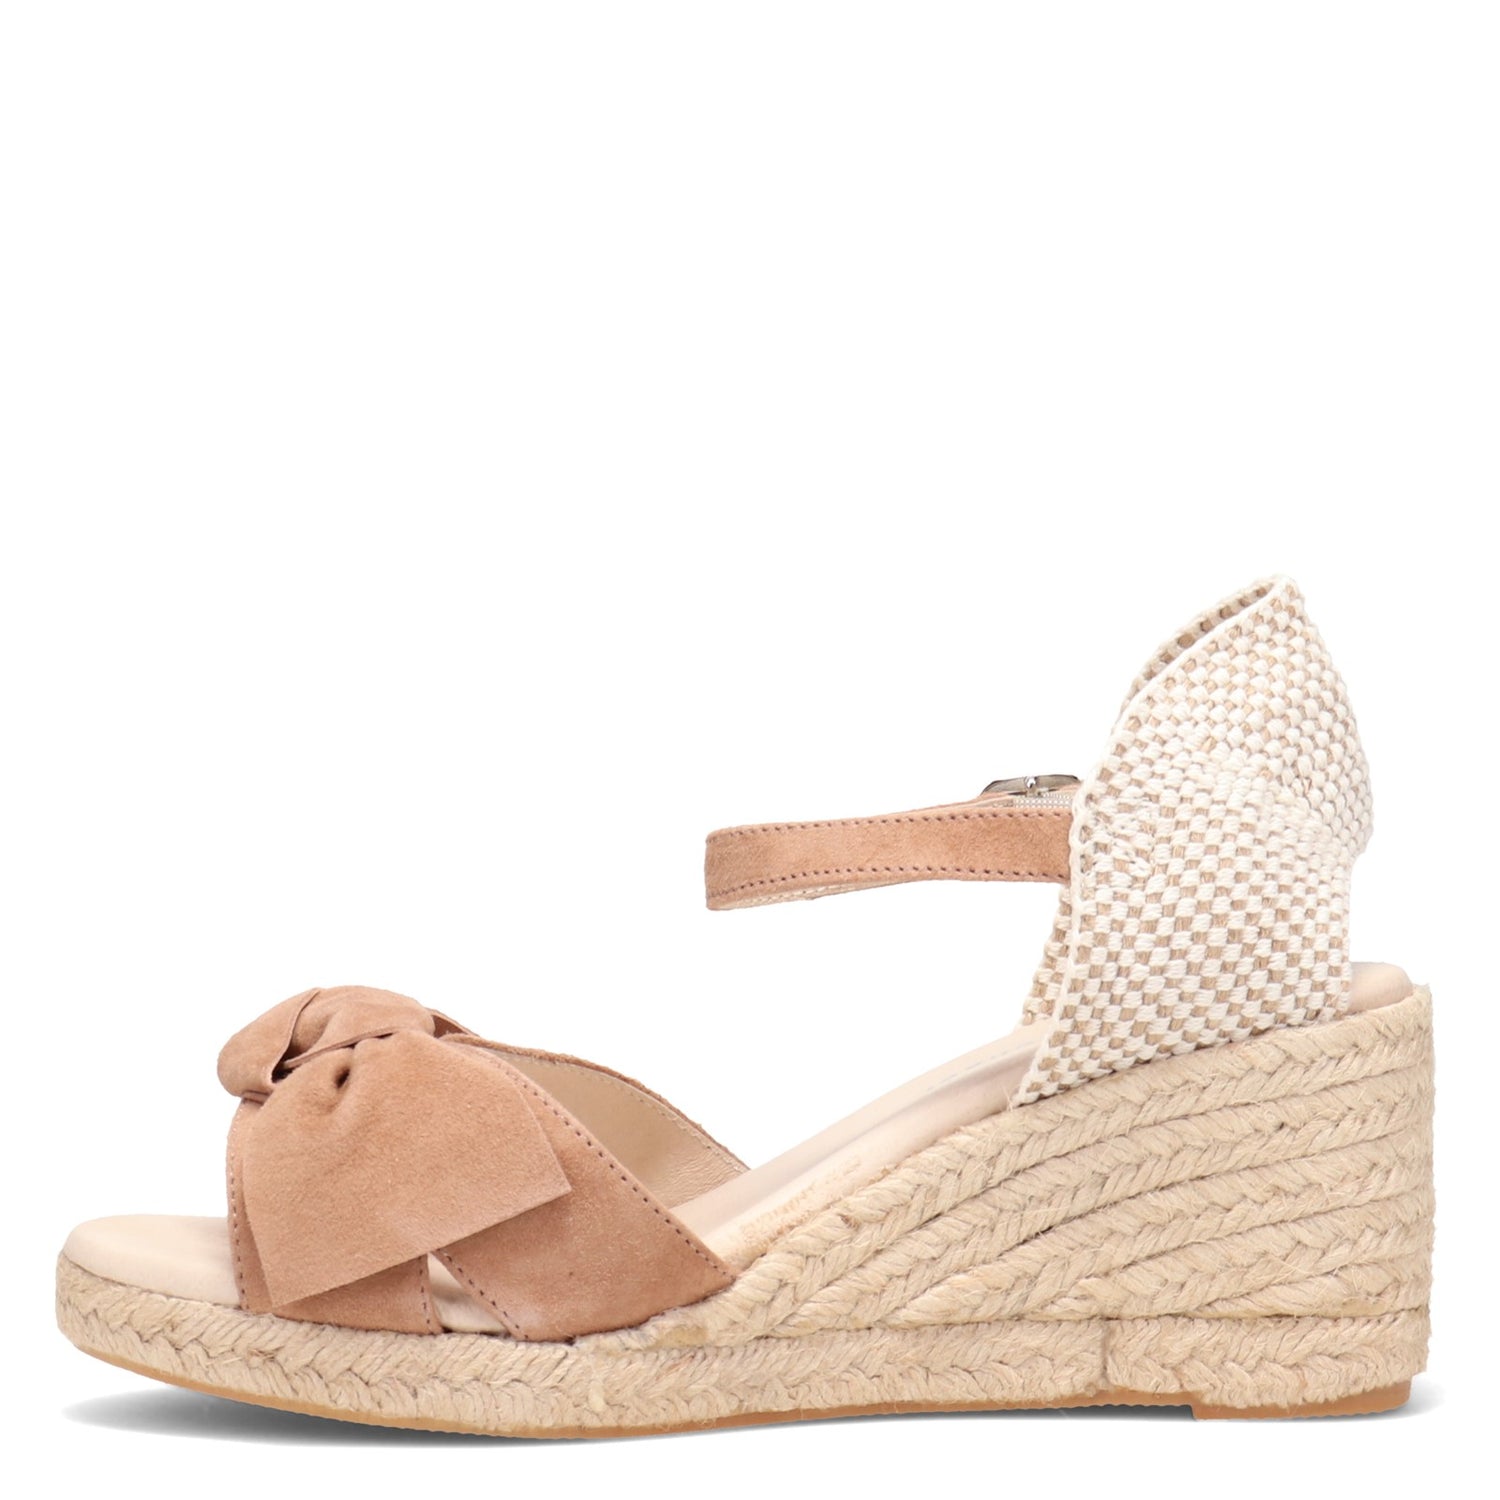 Peltz Shoes  Women's Eric Michael Gwenith Sandal TAUPE GWENITH-TAUPE